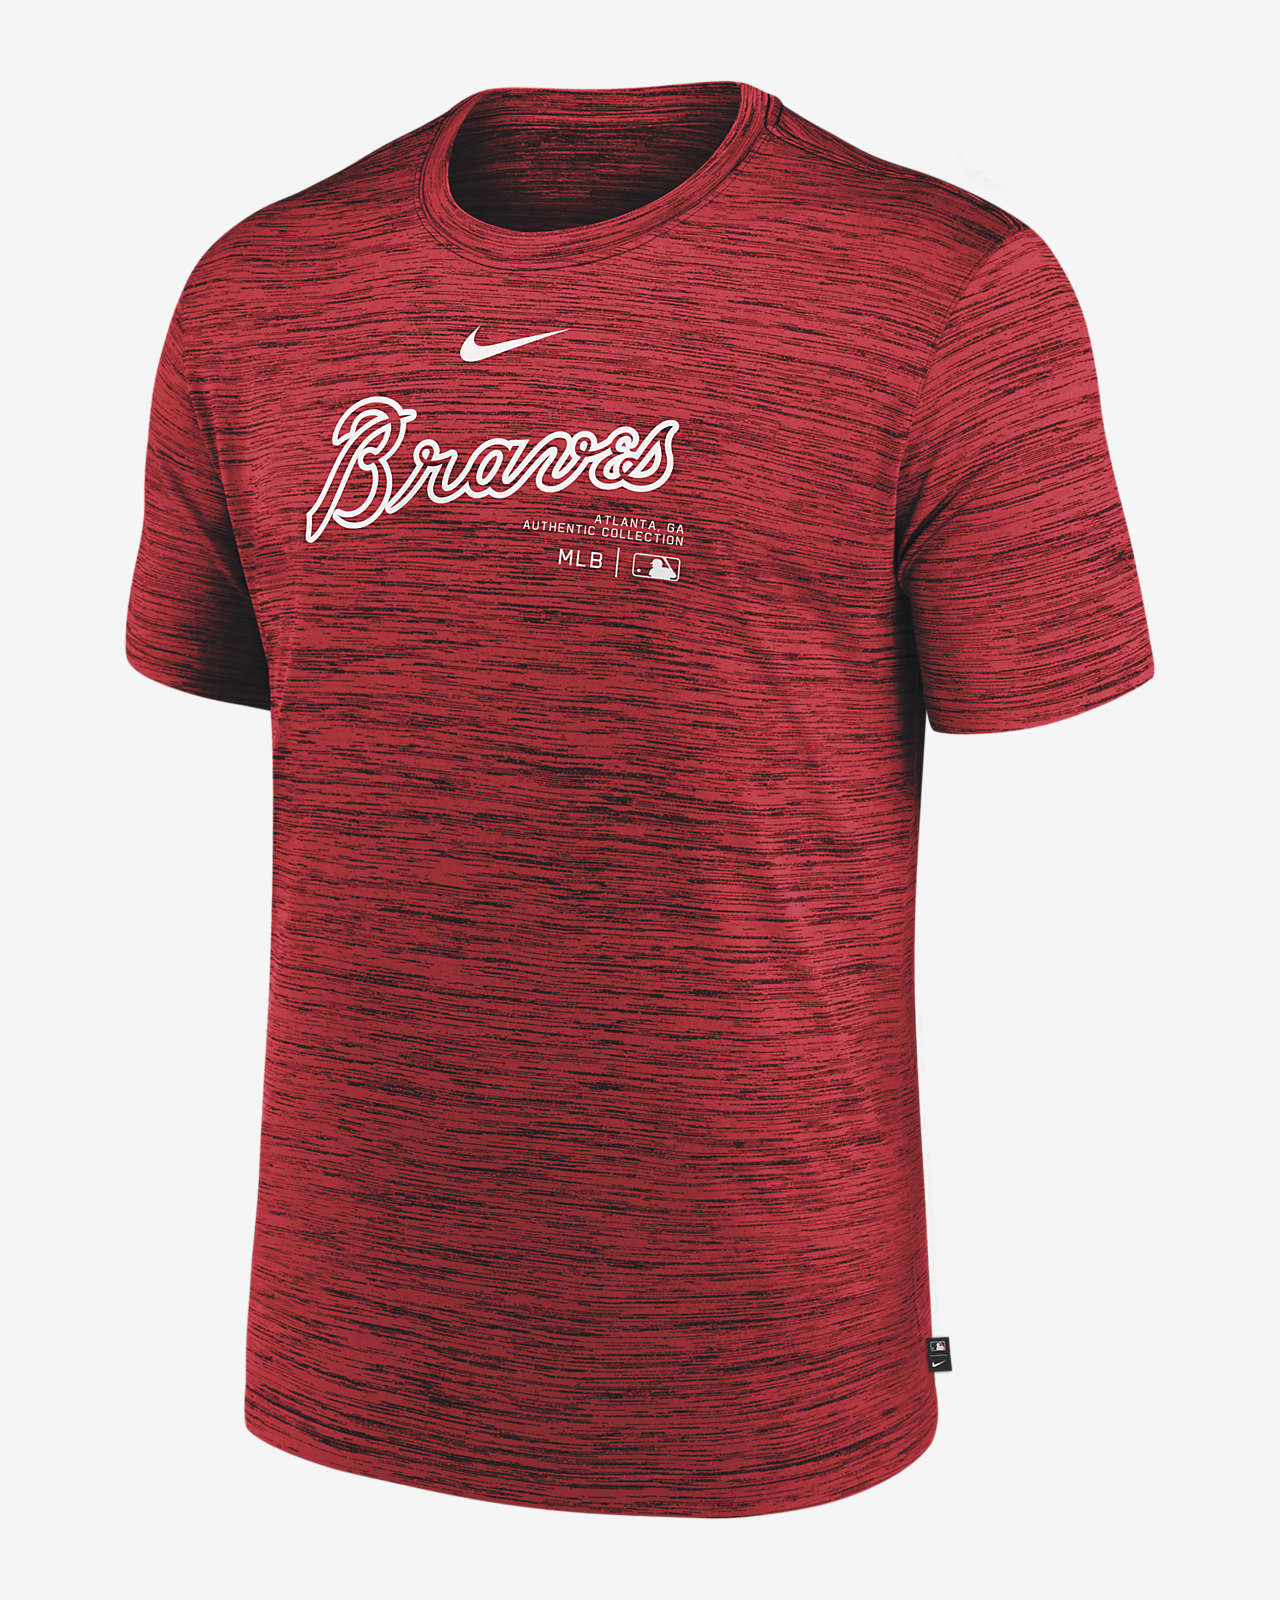 https://static.nike.com/a/images/t_PDP_1280_v1/f_auto,q_auto:eco/cdf707a1-8d7b-40c4-820c-e657f83f73c7/atlanta-braves-authentic-collection-practice-velocity-mens-dri-fit-t-shirt-vmknpK.png